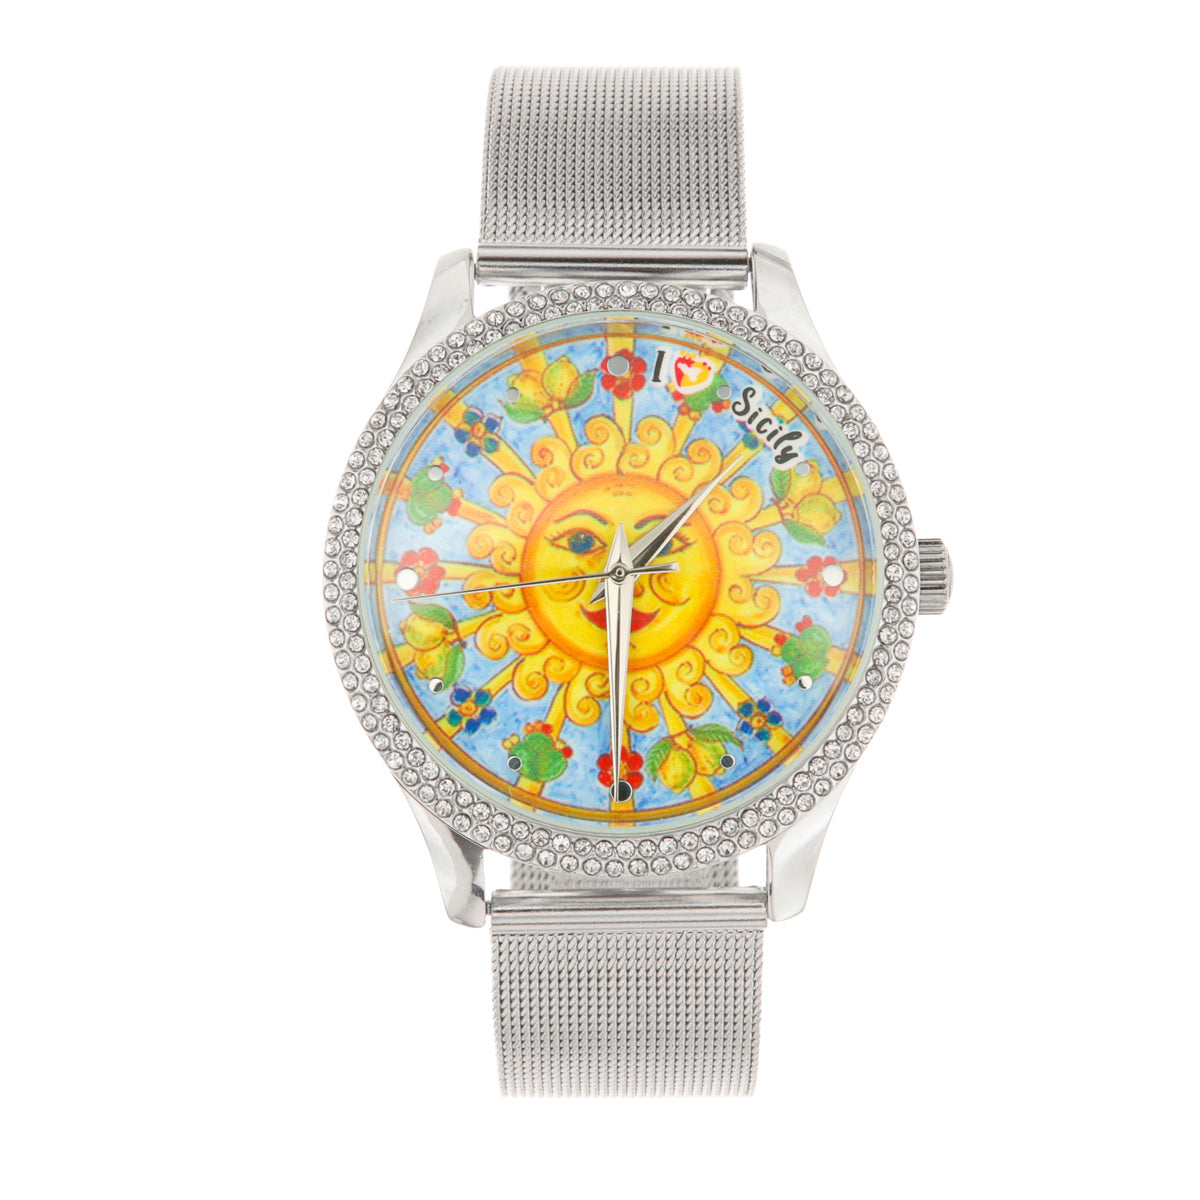 Analog metal clock dial embellished with Sicilian symbols and white crystals